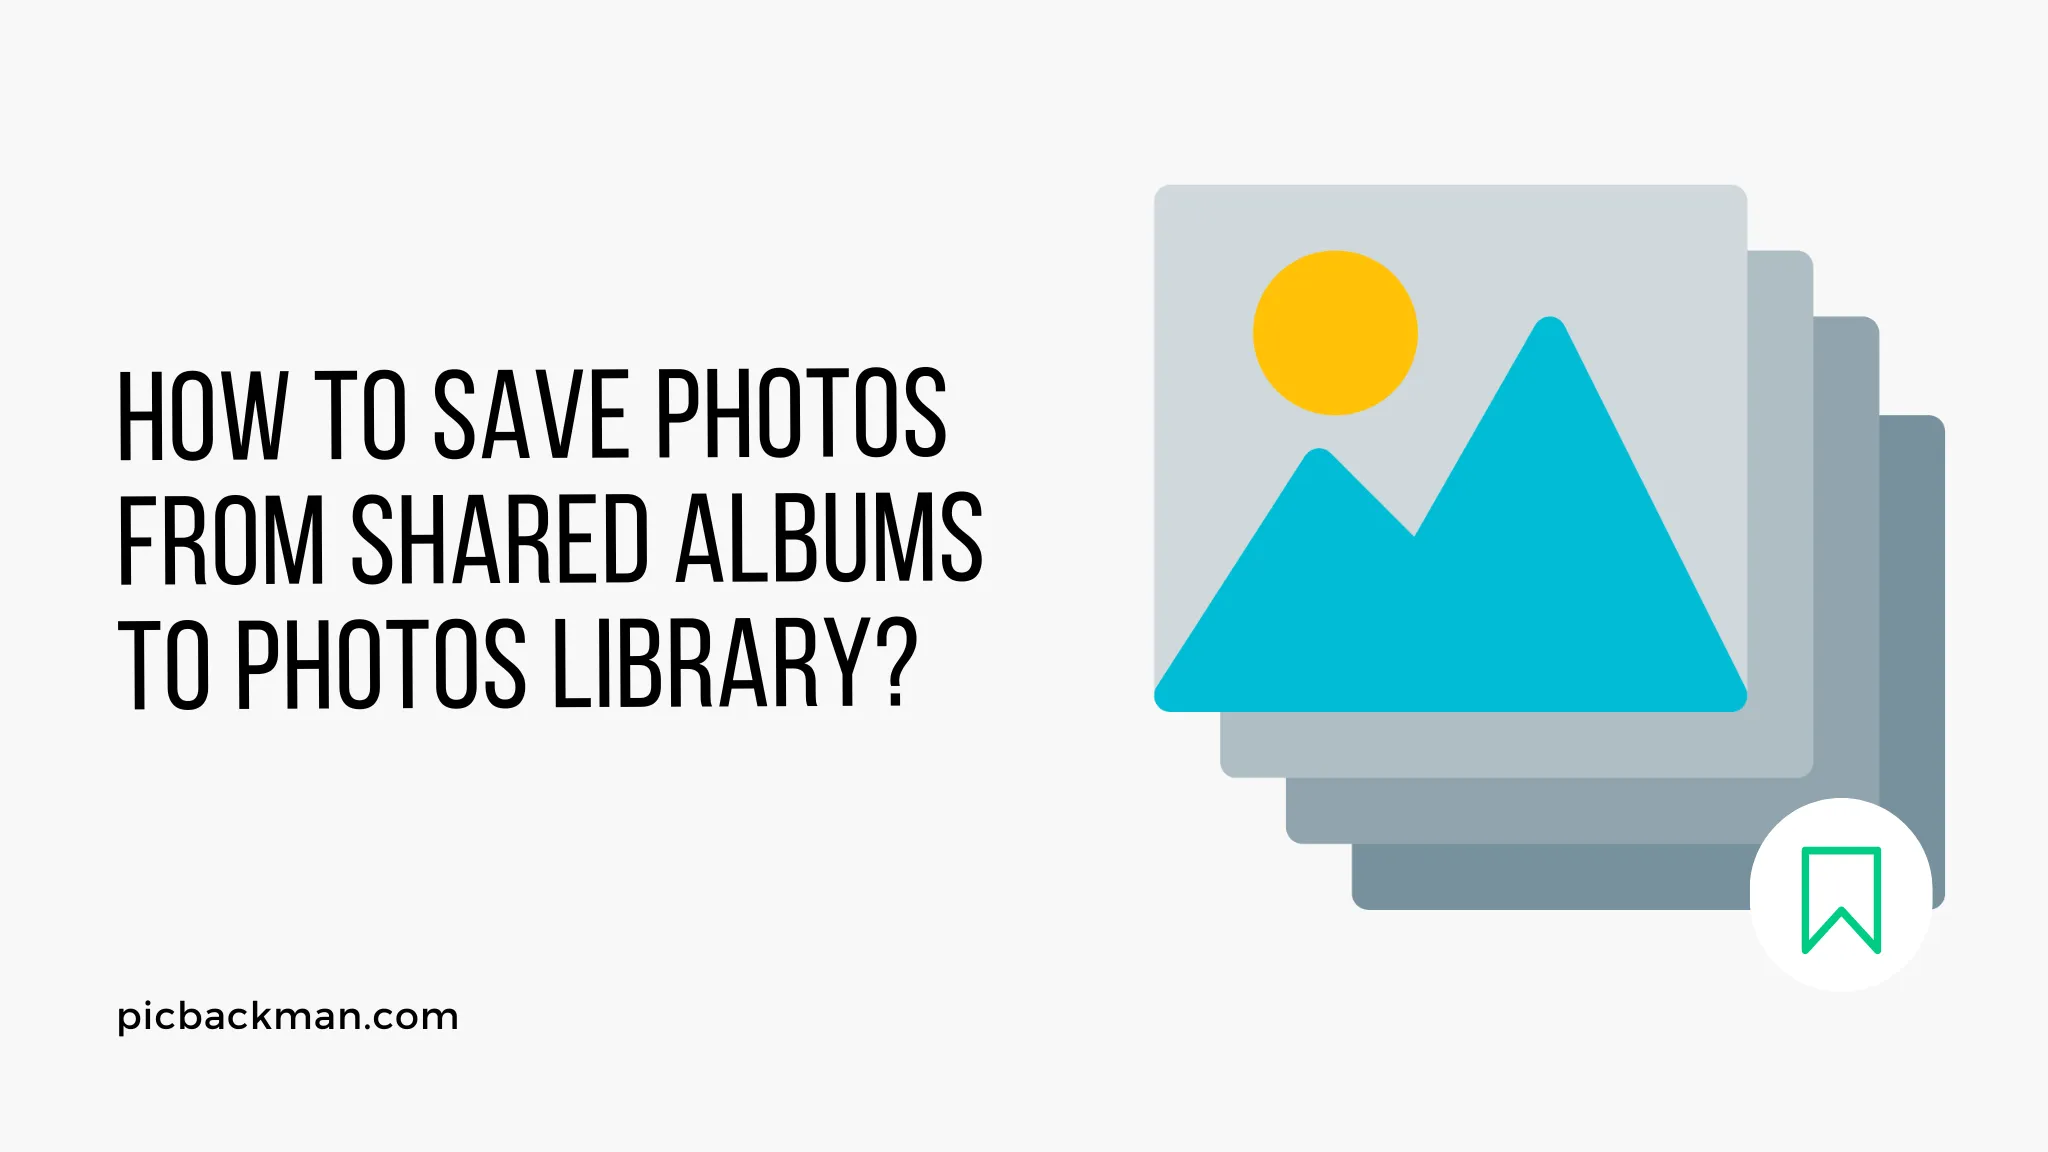 How to Save Photos from Shared Albums to Photos Library